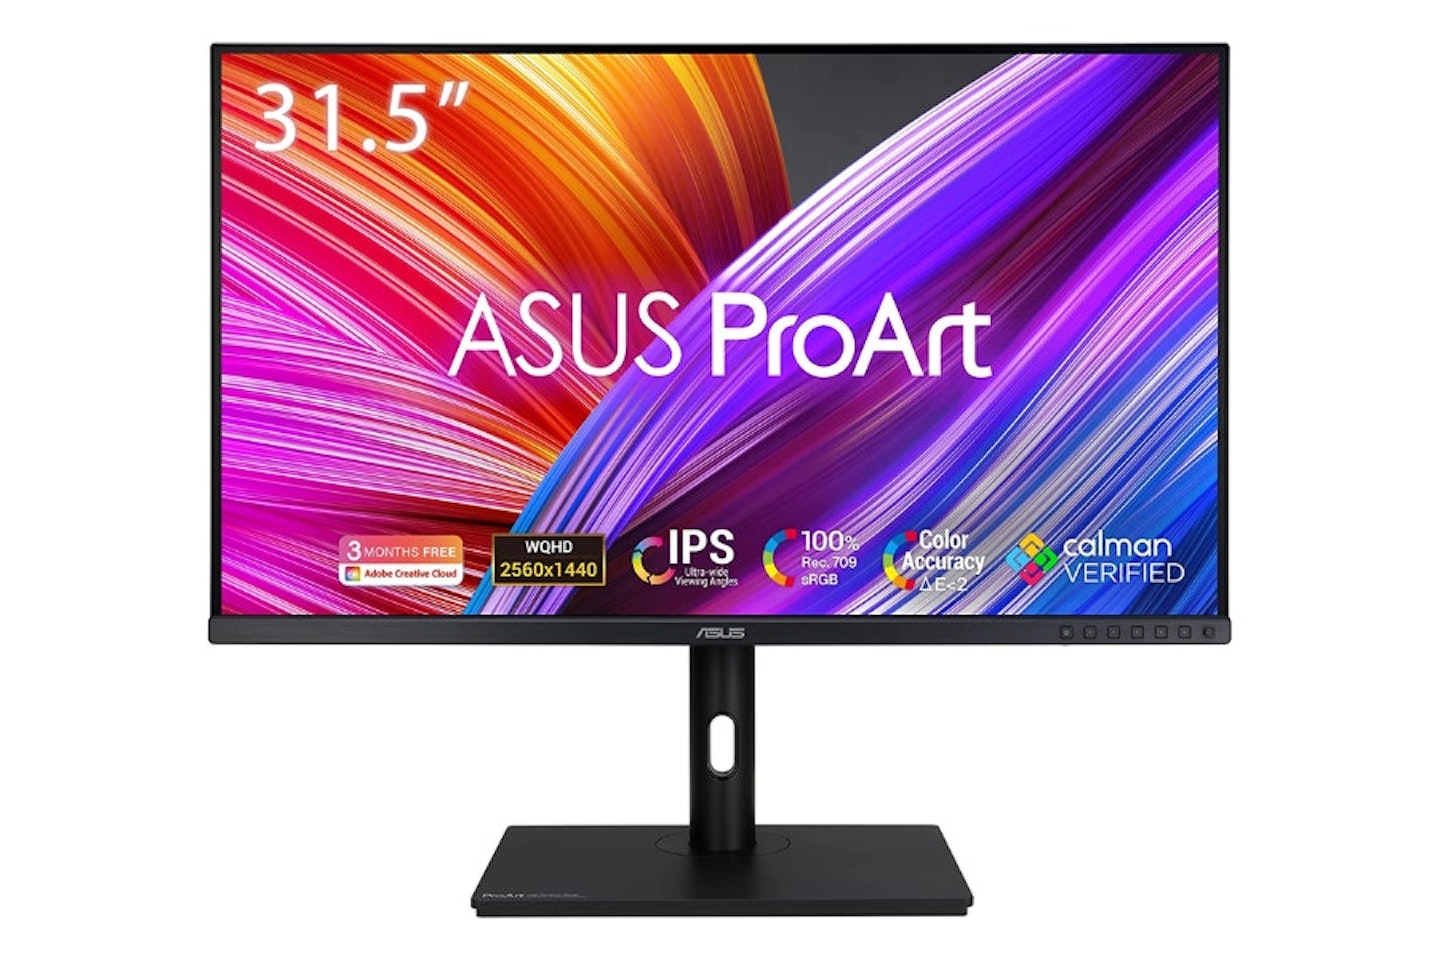 ASUS ProArt Display PA328QV Professional Monitor  - one of the best monitors for photo editing